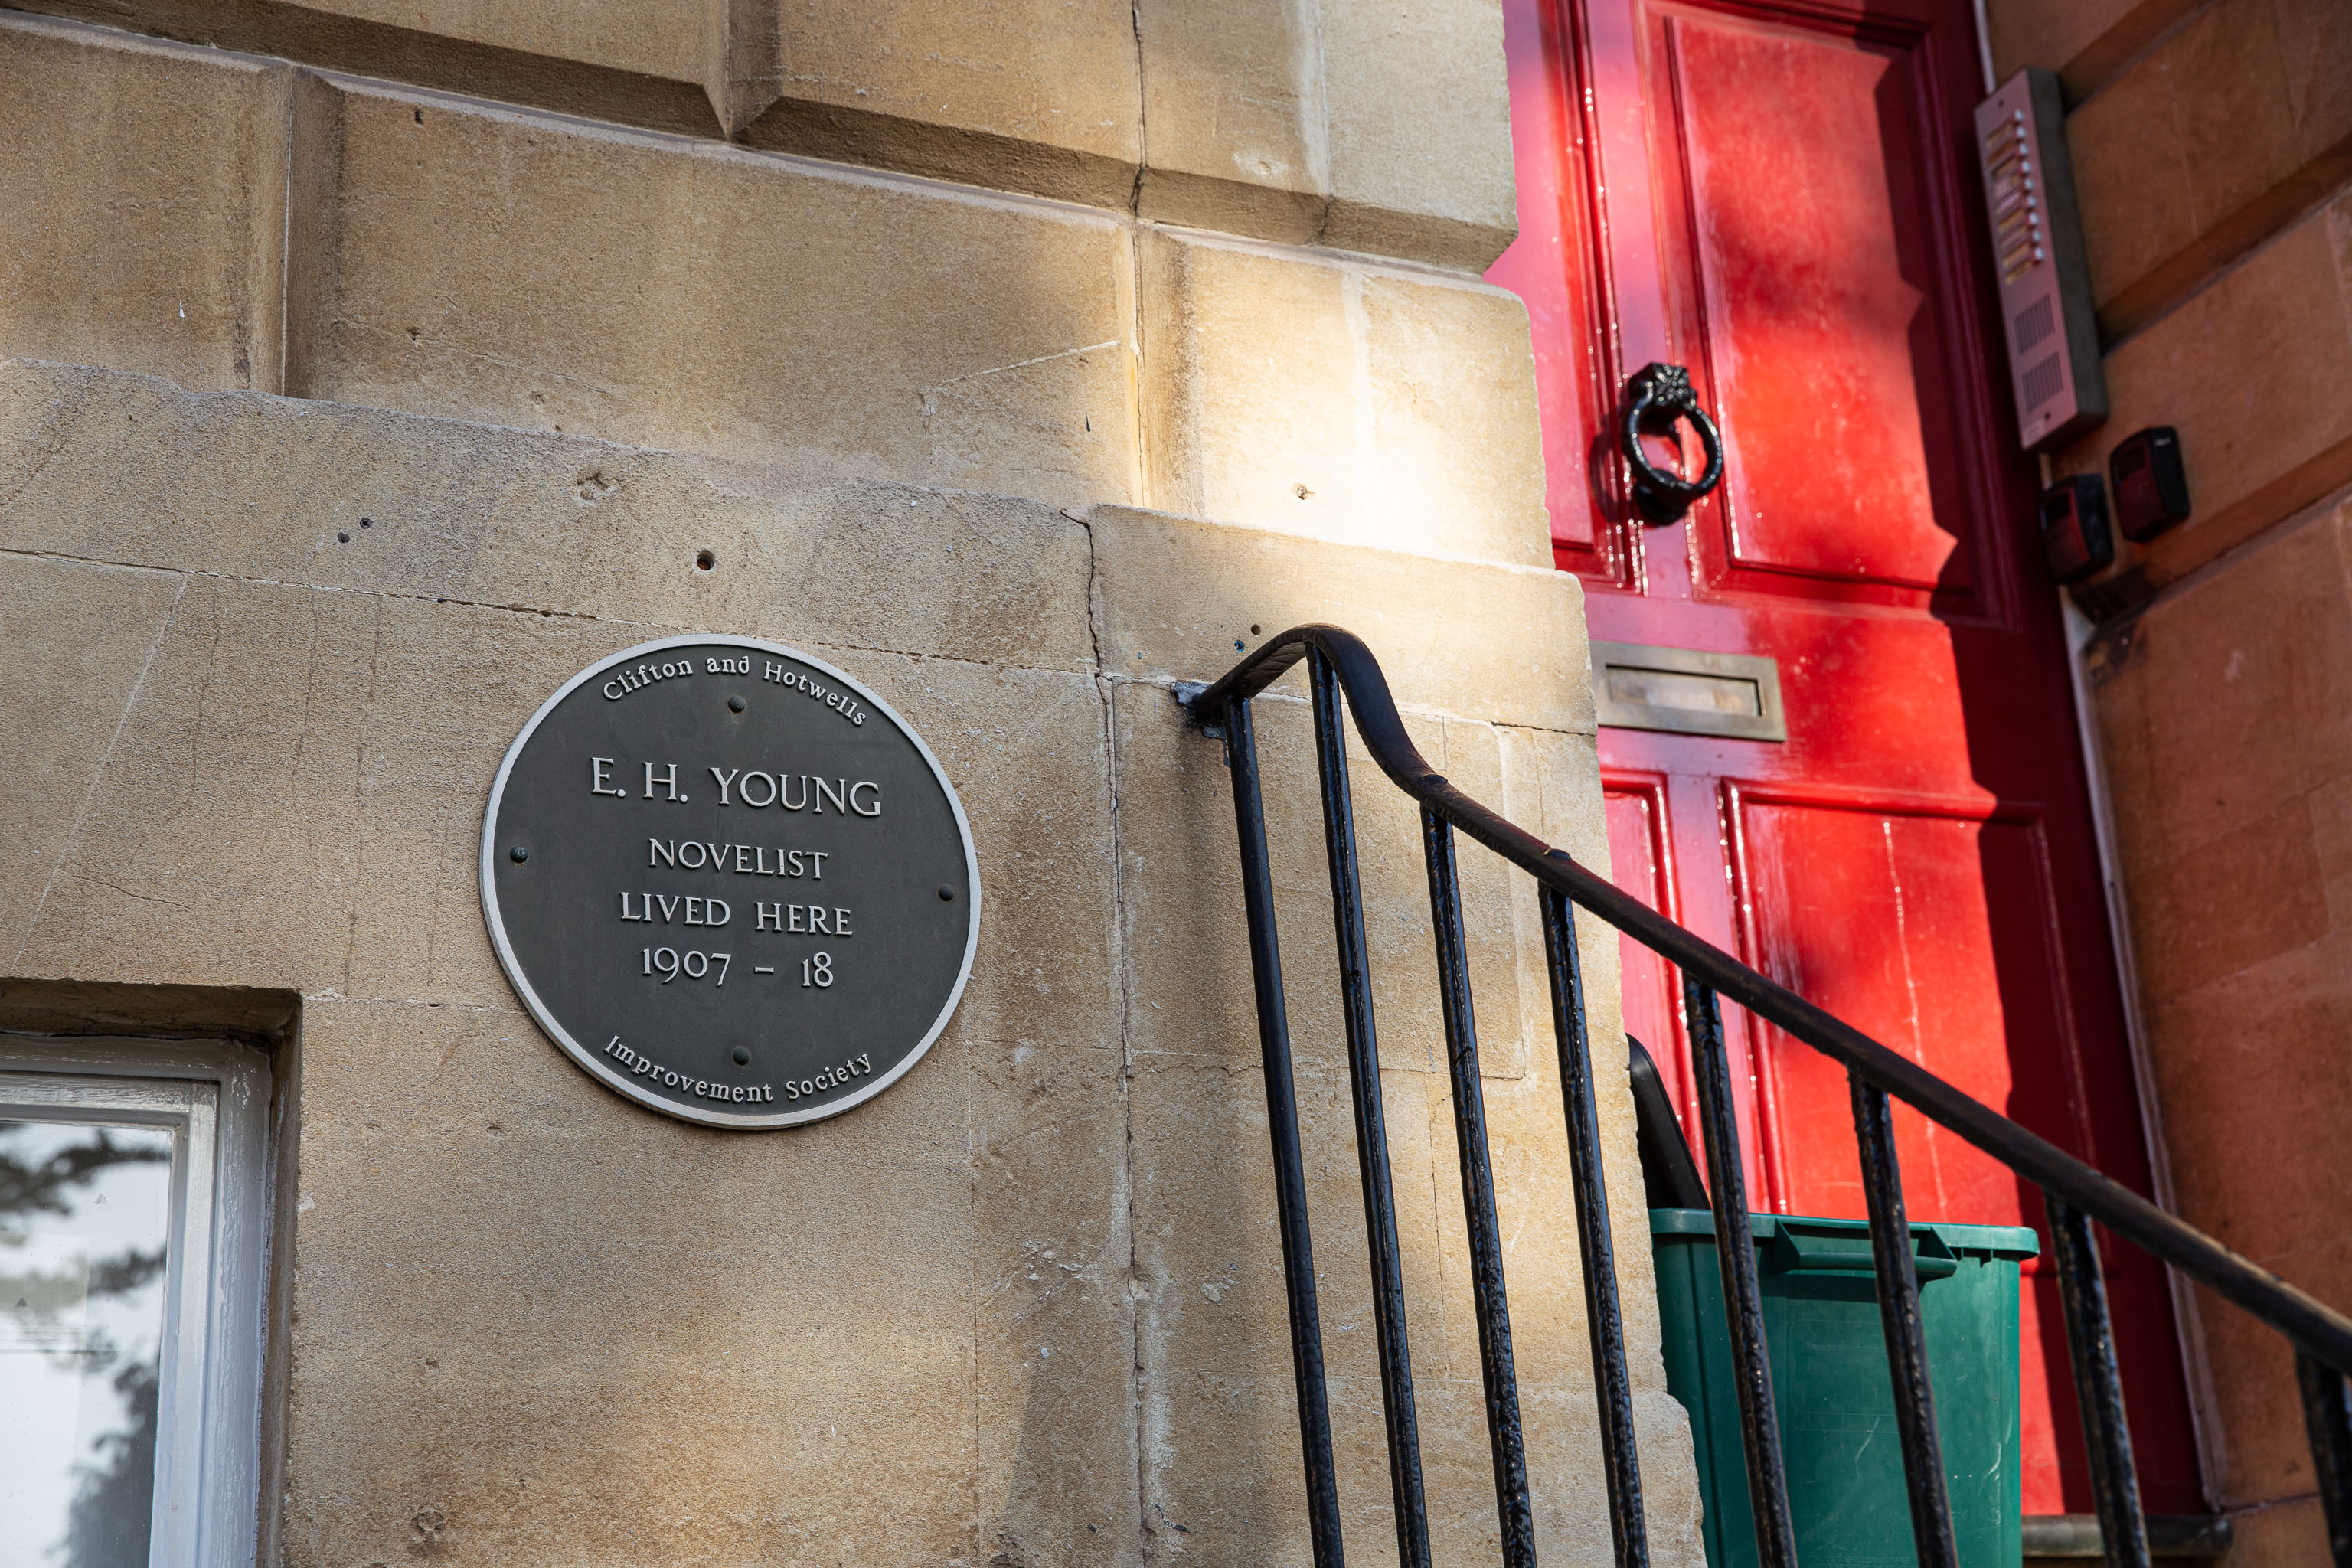 EH Young
Inspired by this plaque, I'm now (a couple of months later) about a third of the way through EH Young's Chatterton Square, set in a fictionalised C...